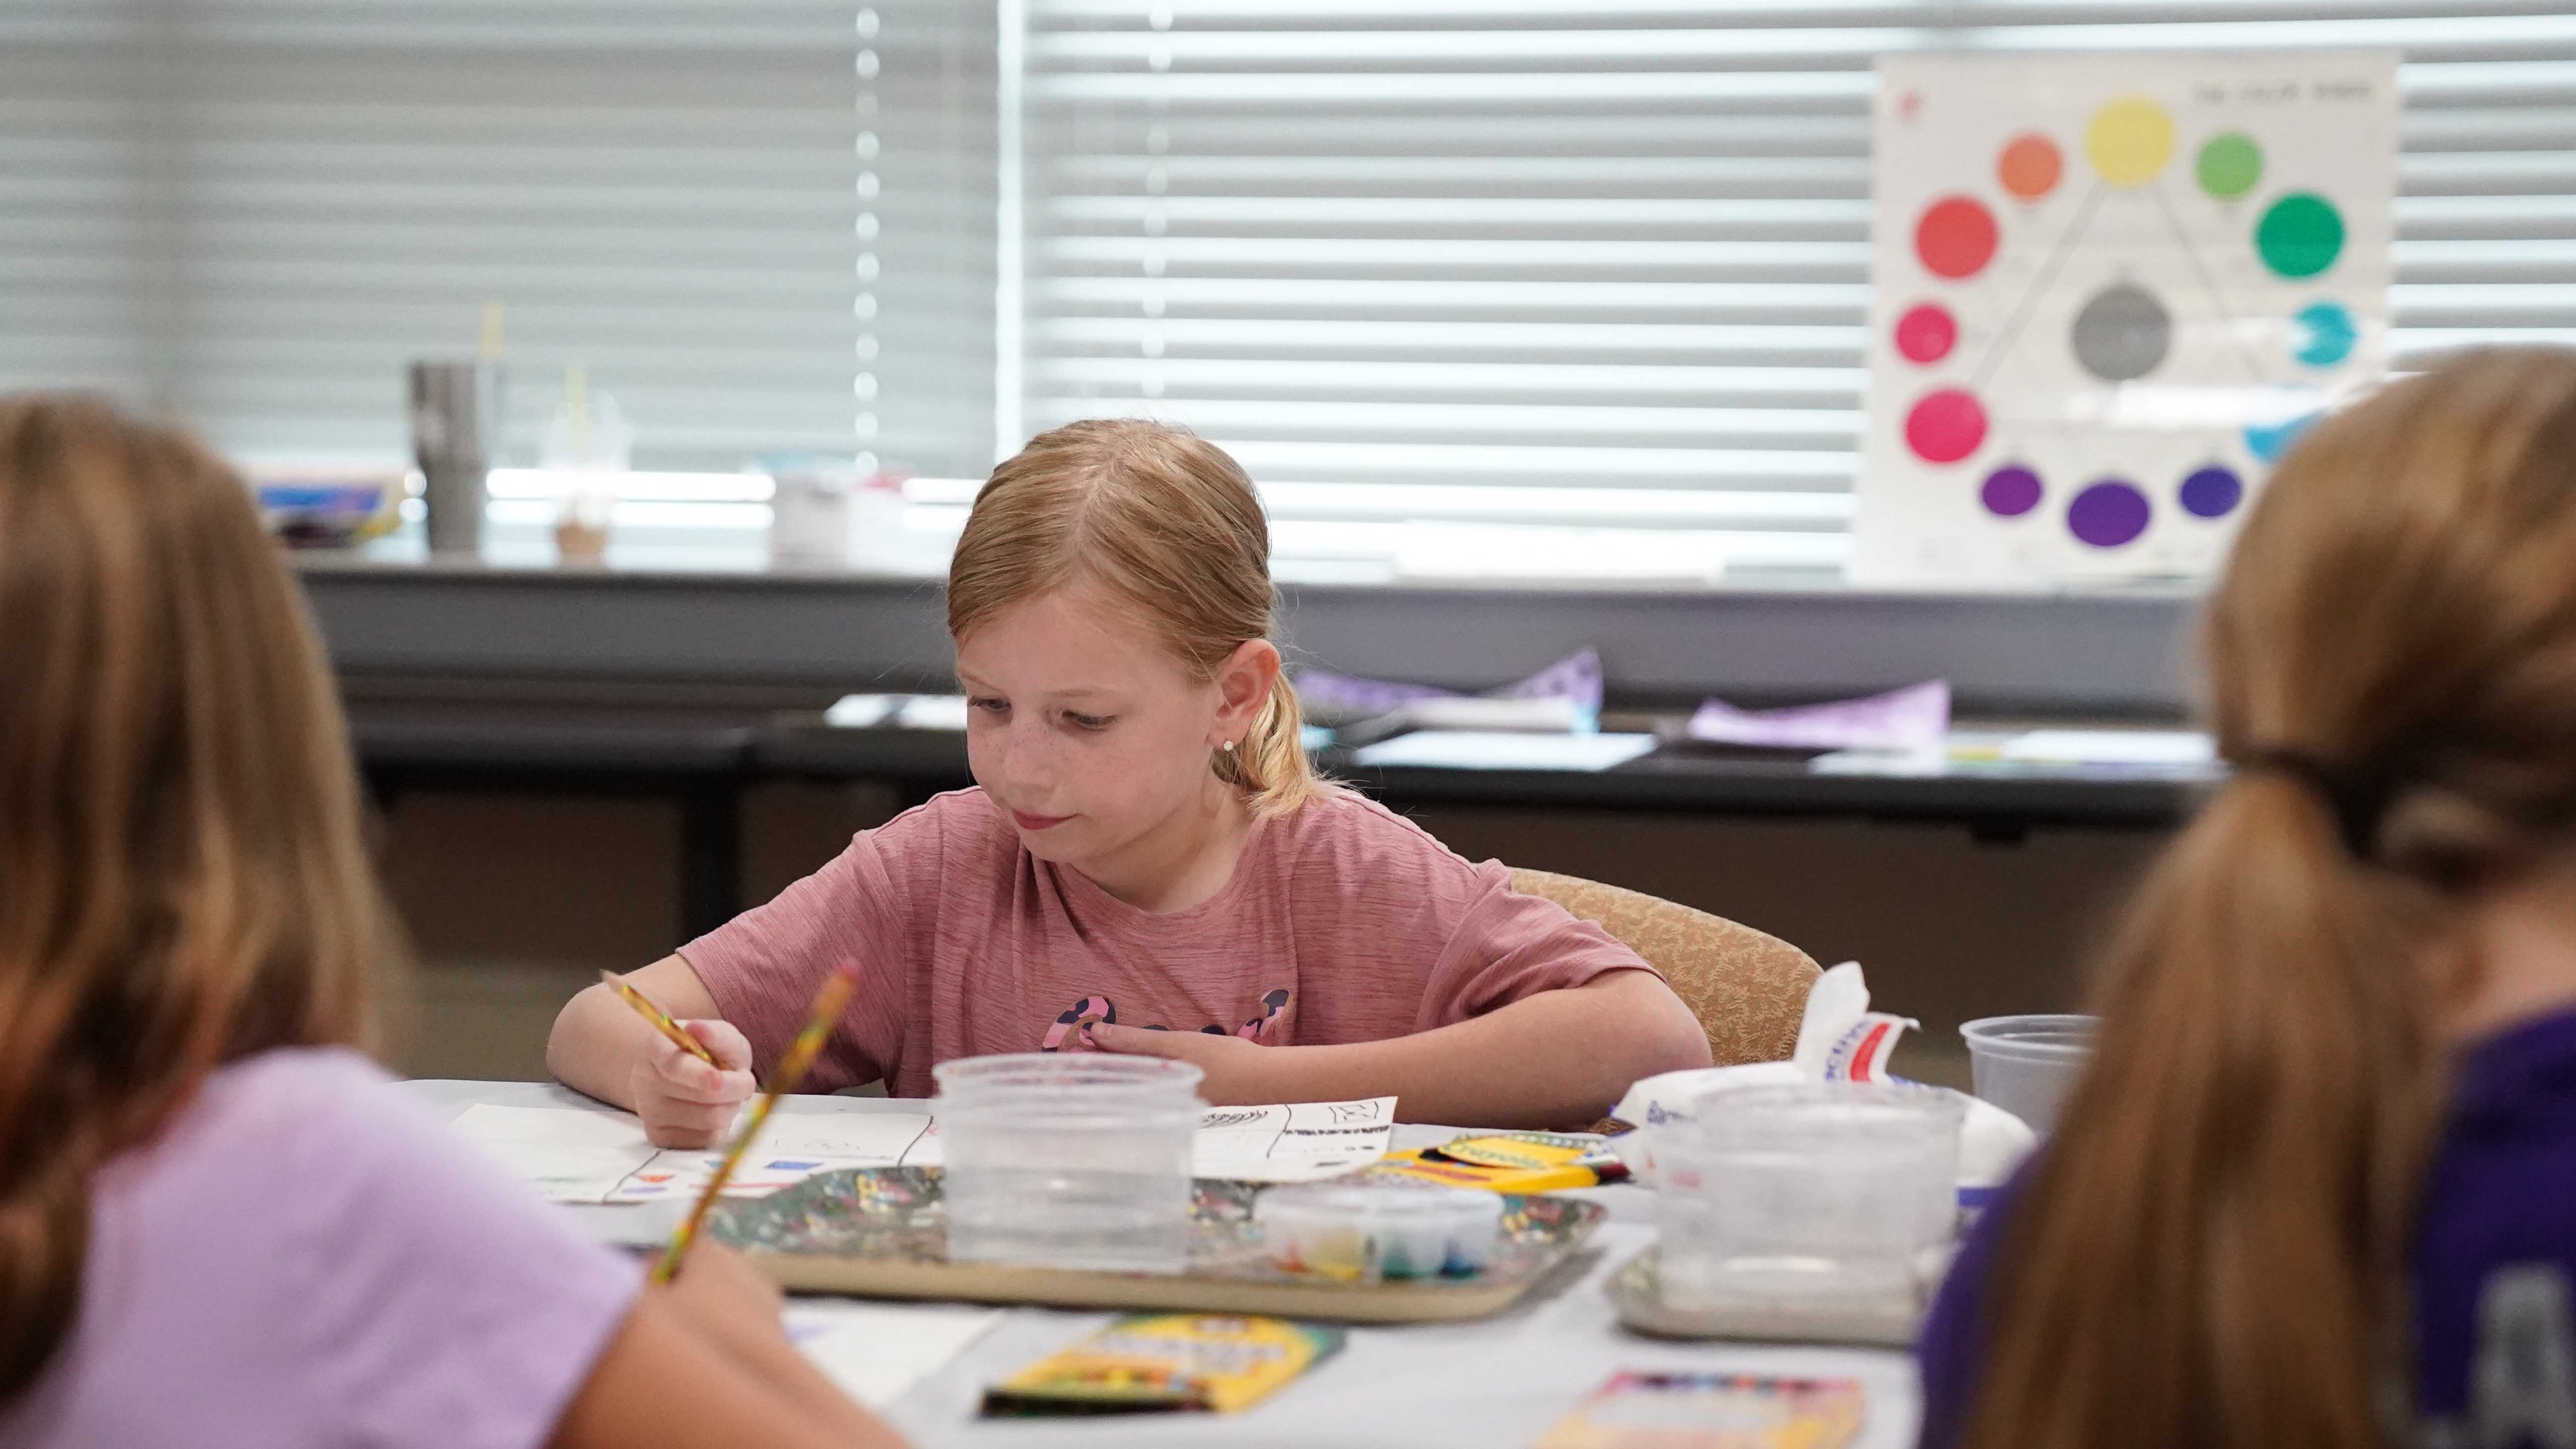 MCC offering classes for children in art, music, science and robotics this fall